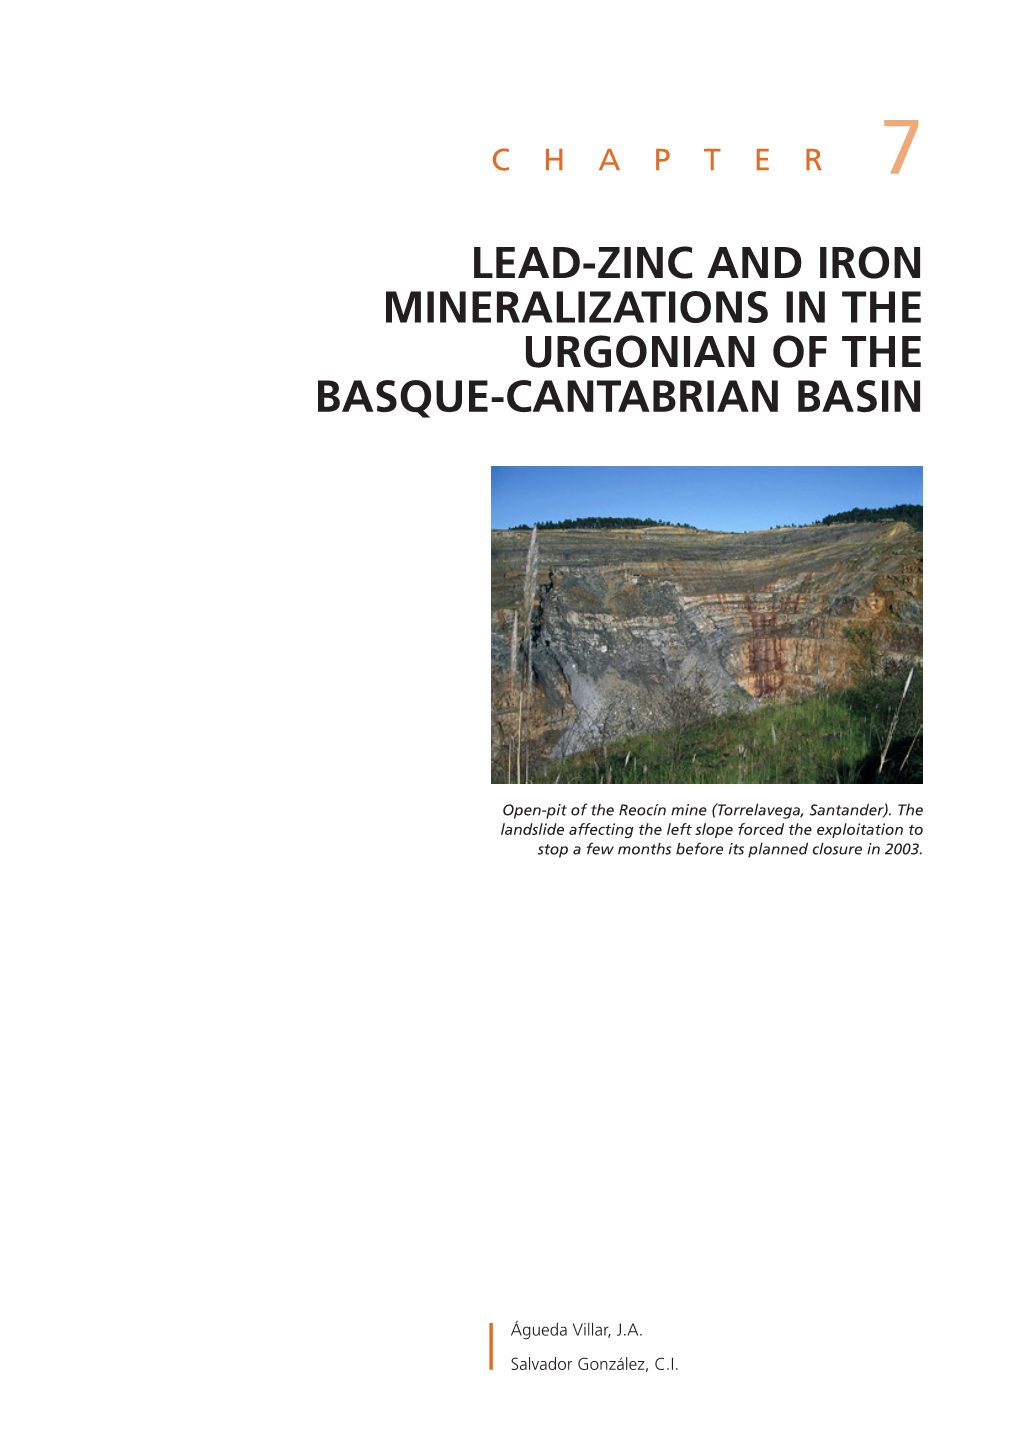 Lead-Zinc and Iron Mineralizations in the Urgonian of the Basque-Cantabrian Basin